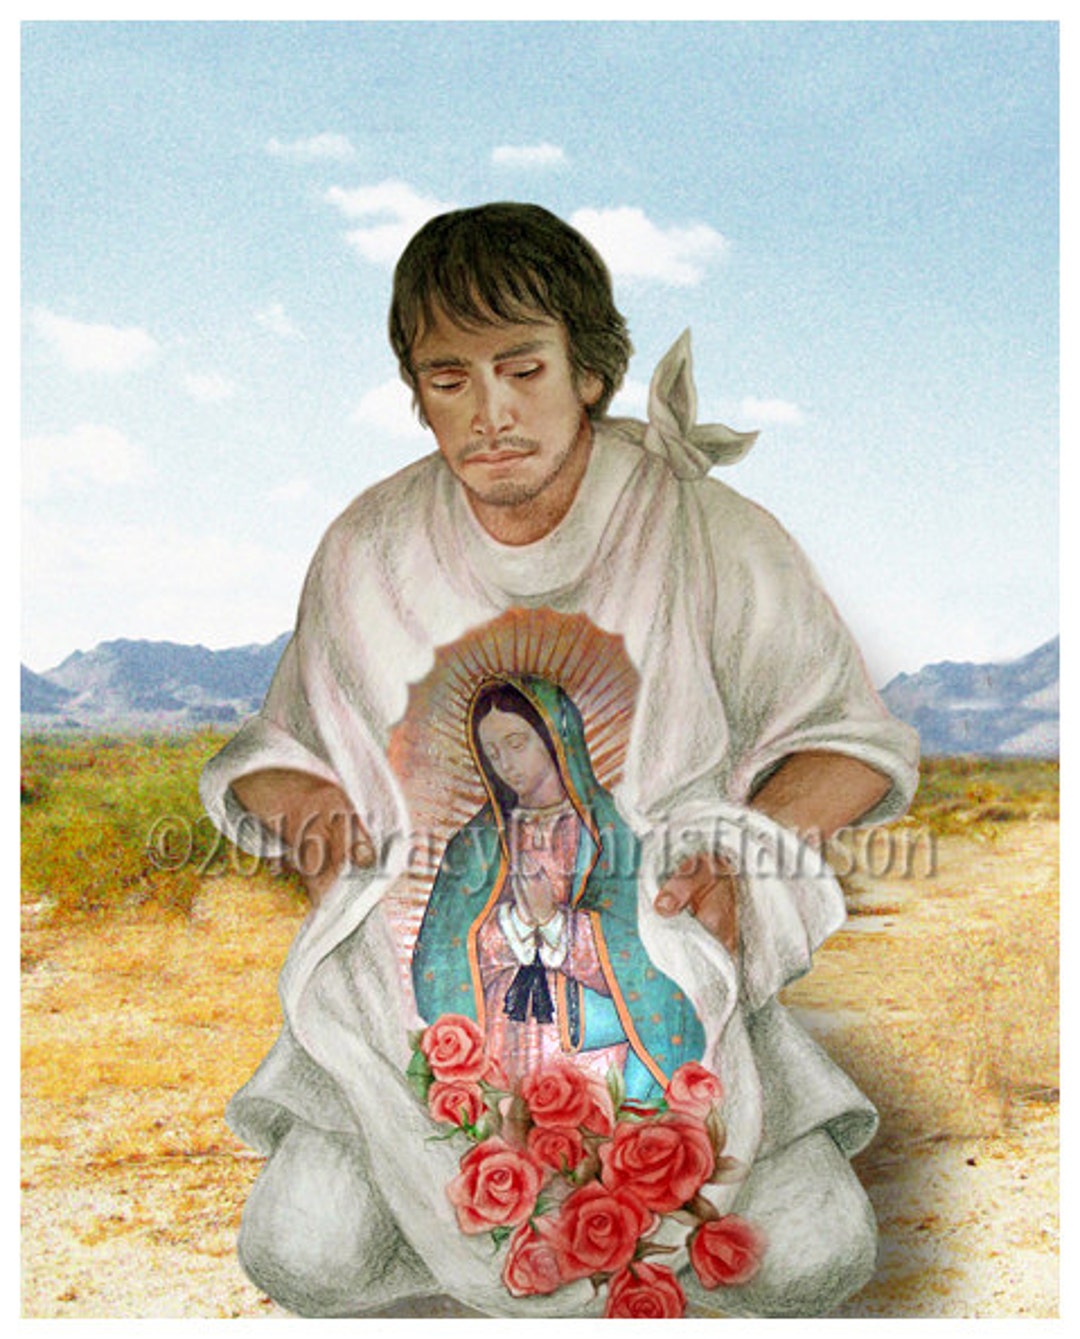 St. Juan Diego Art Print, Our Lady of Guadalupe -  Portugal